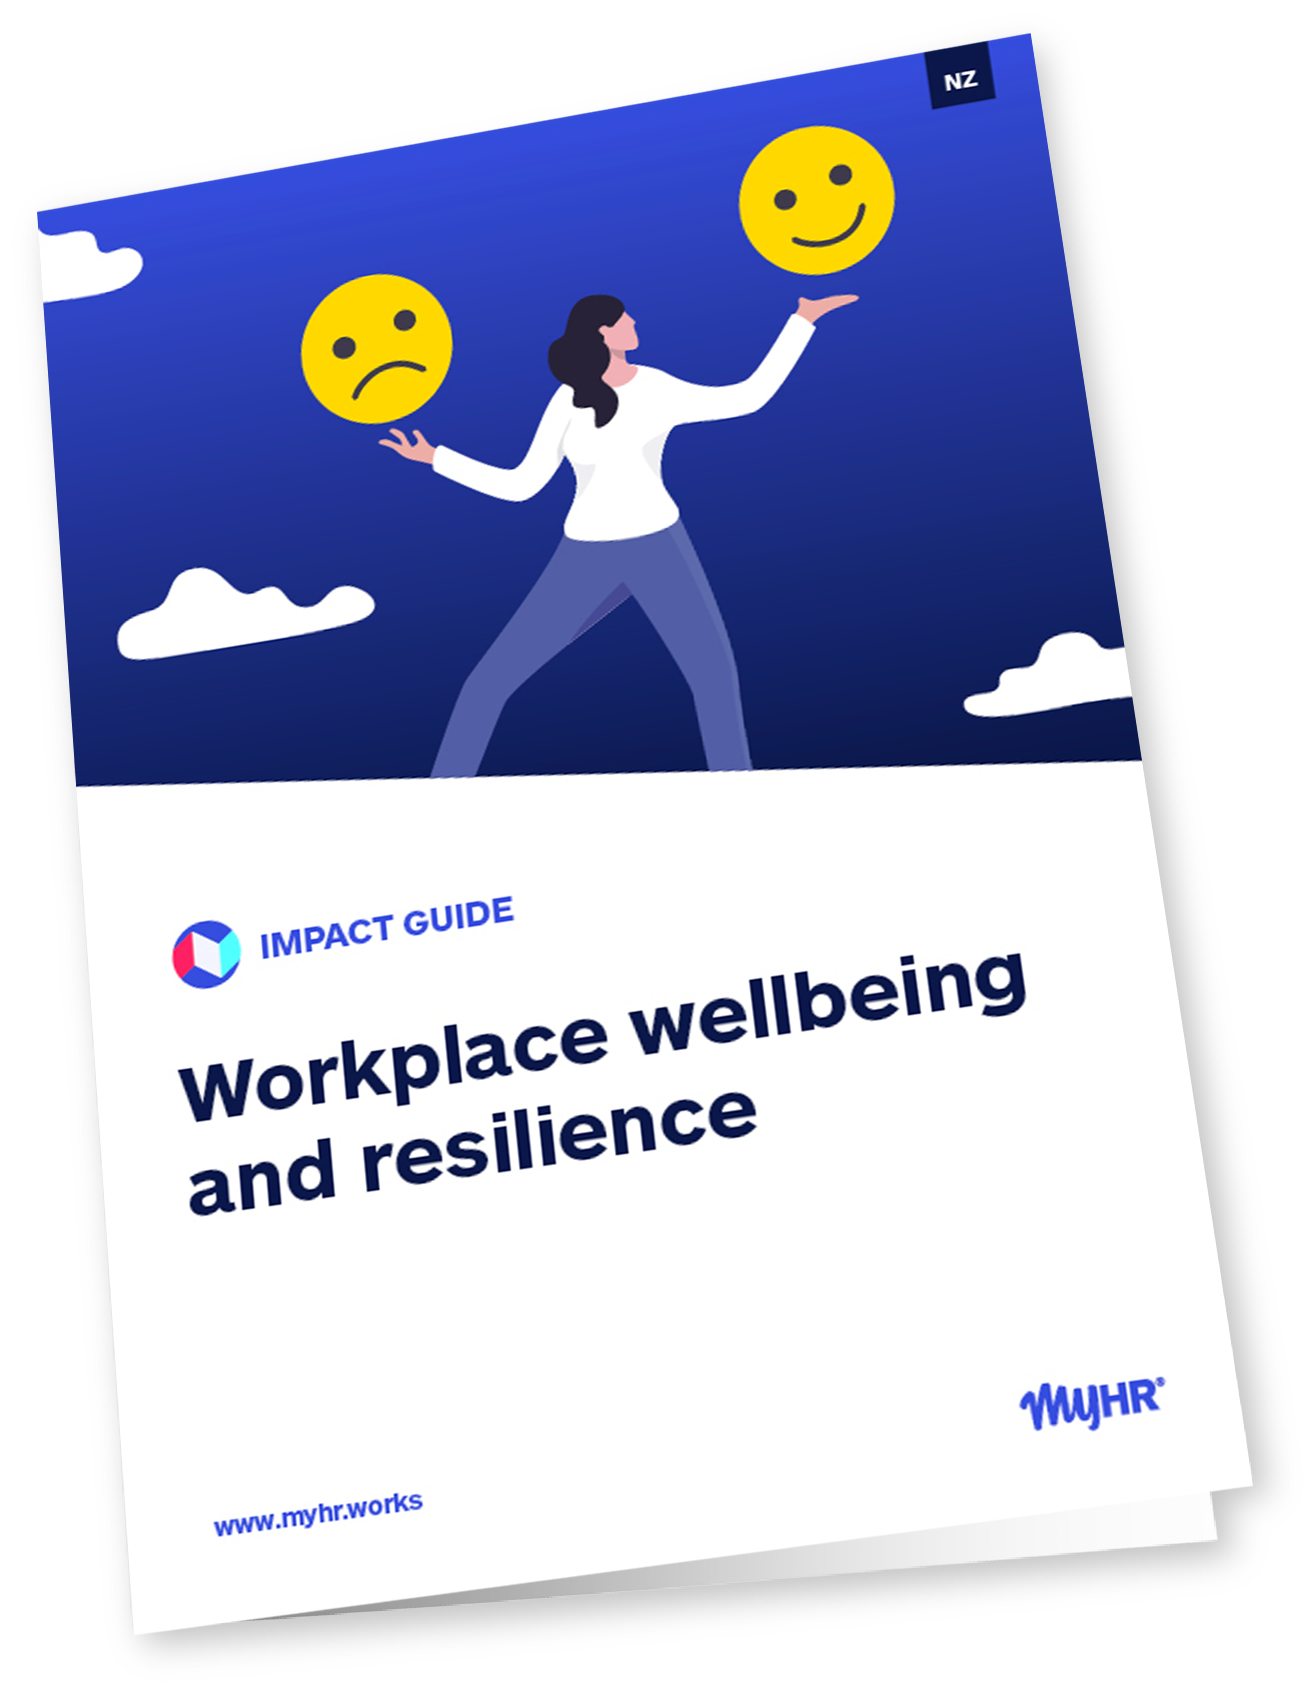 MYHR_NZ_COVER-Workplace wellbeing and resilienceMockup_Impact Guide-1